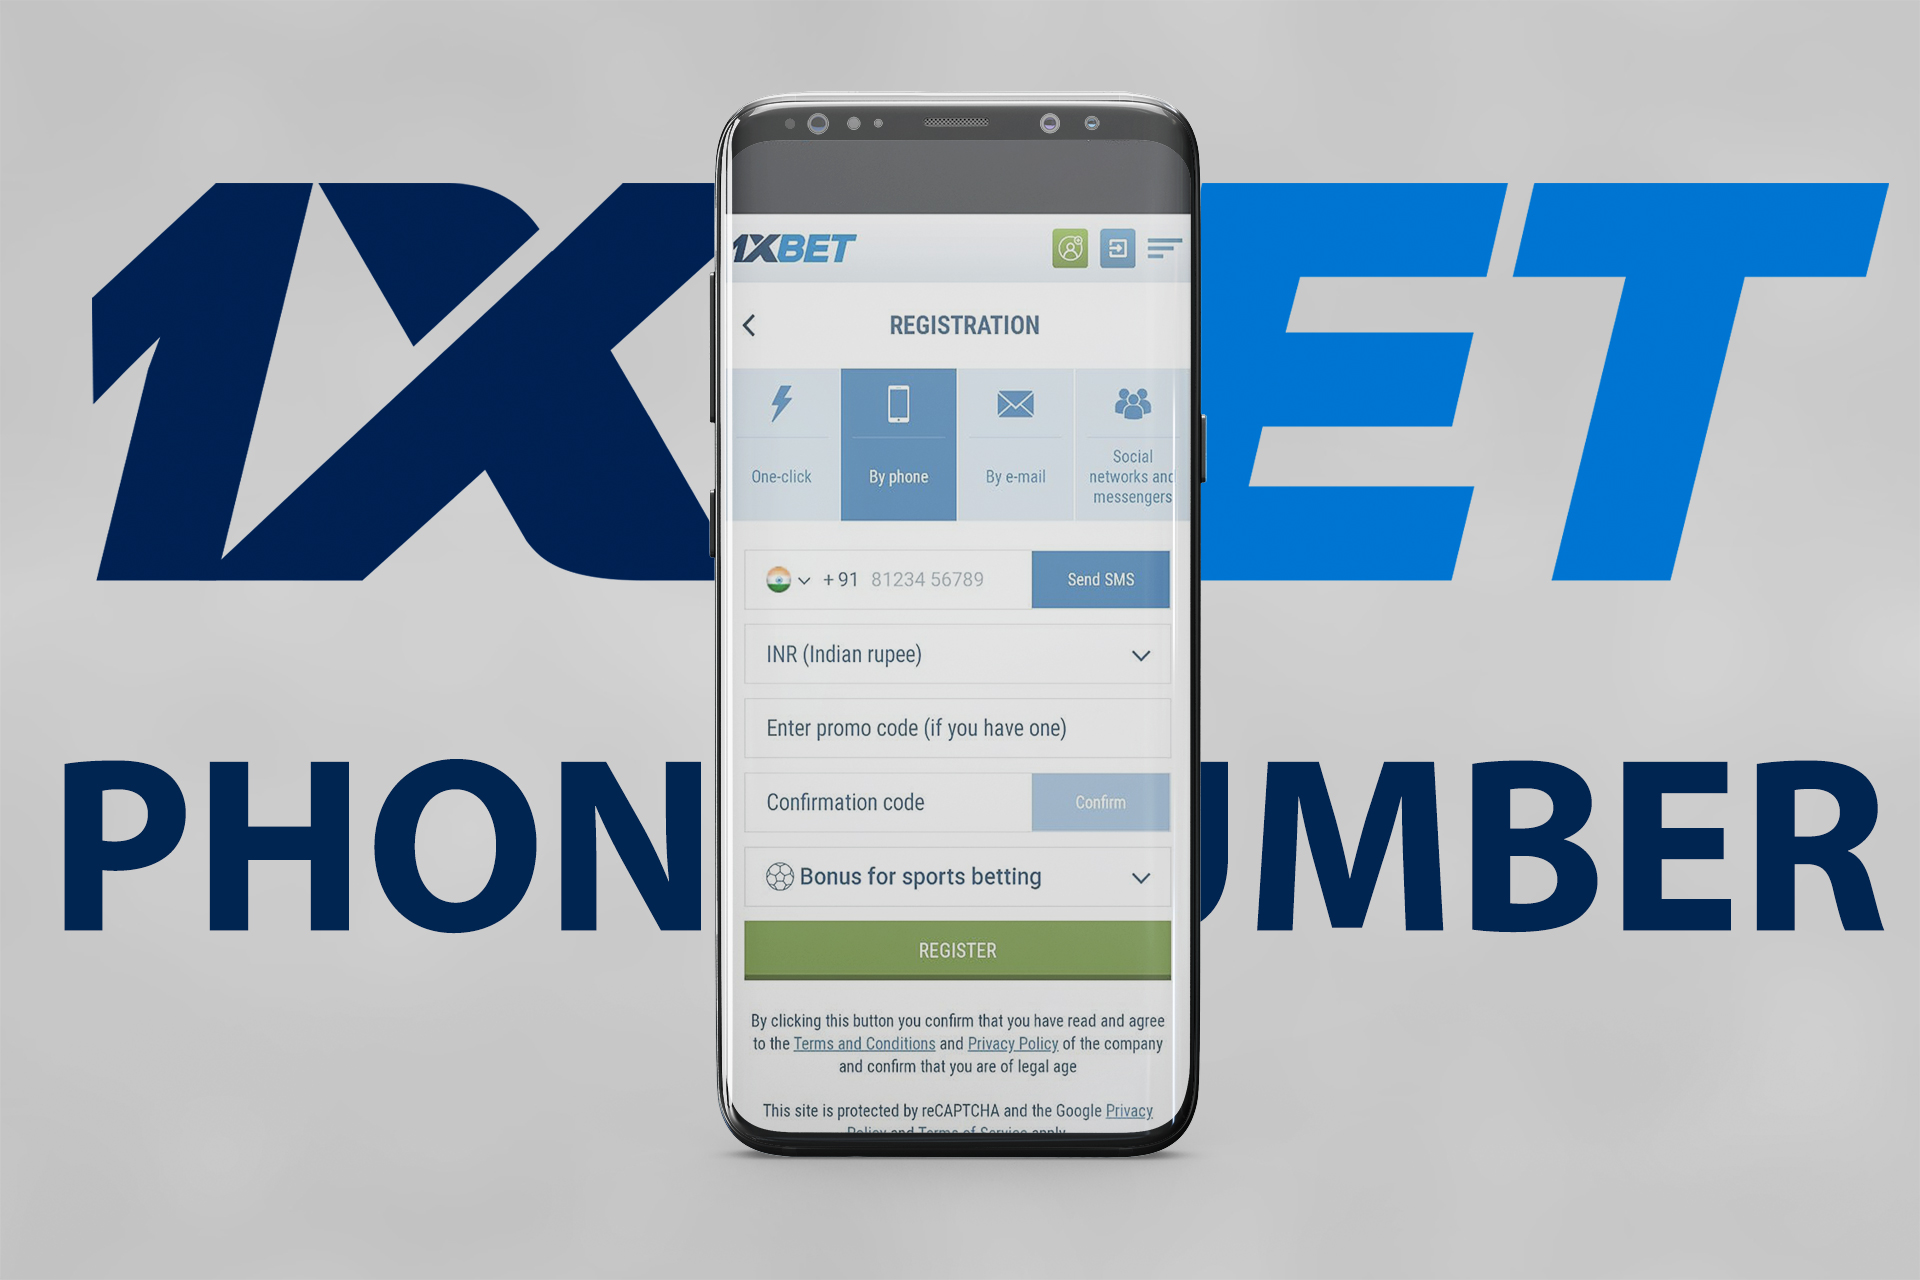 Use your phone numbet to sign up for 1xbet.